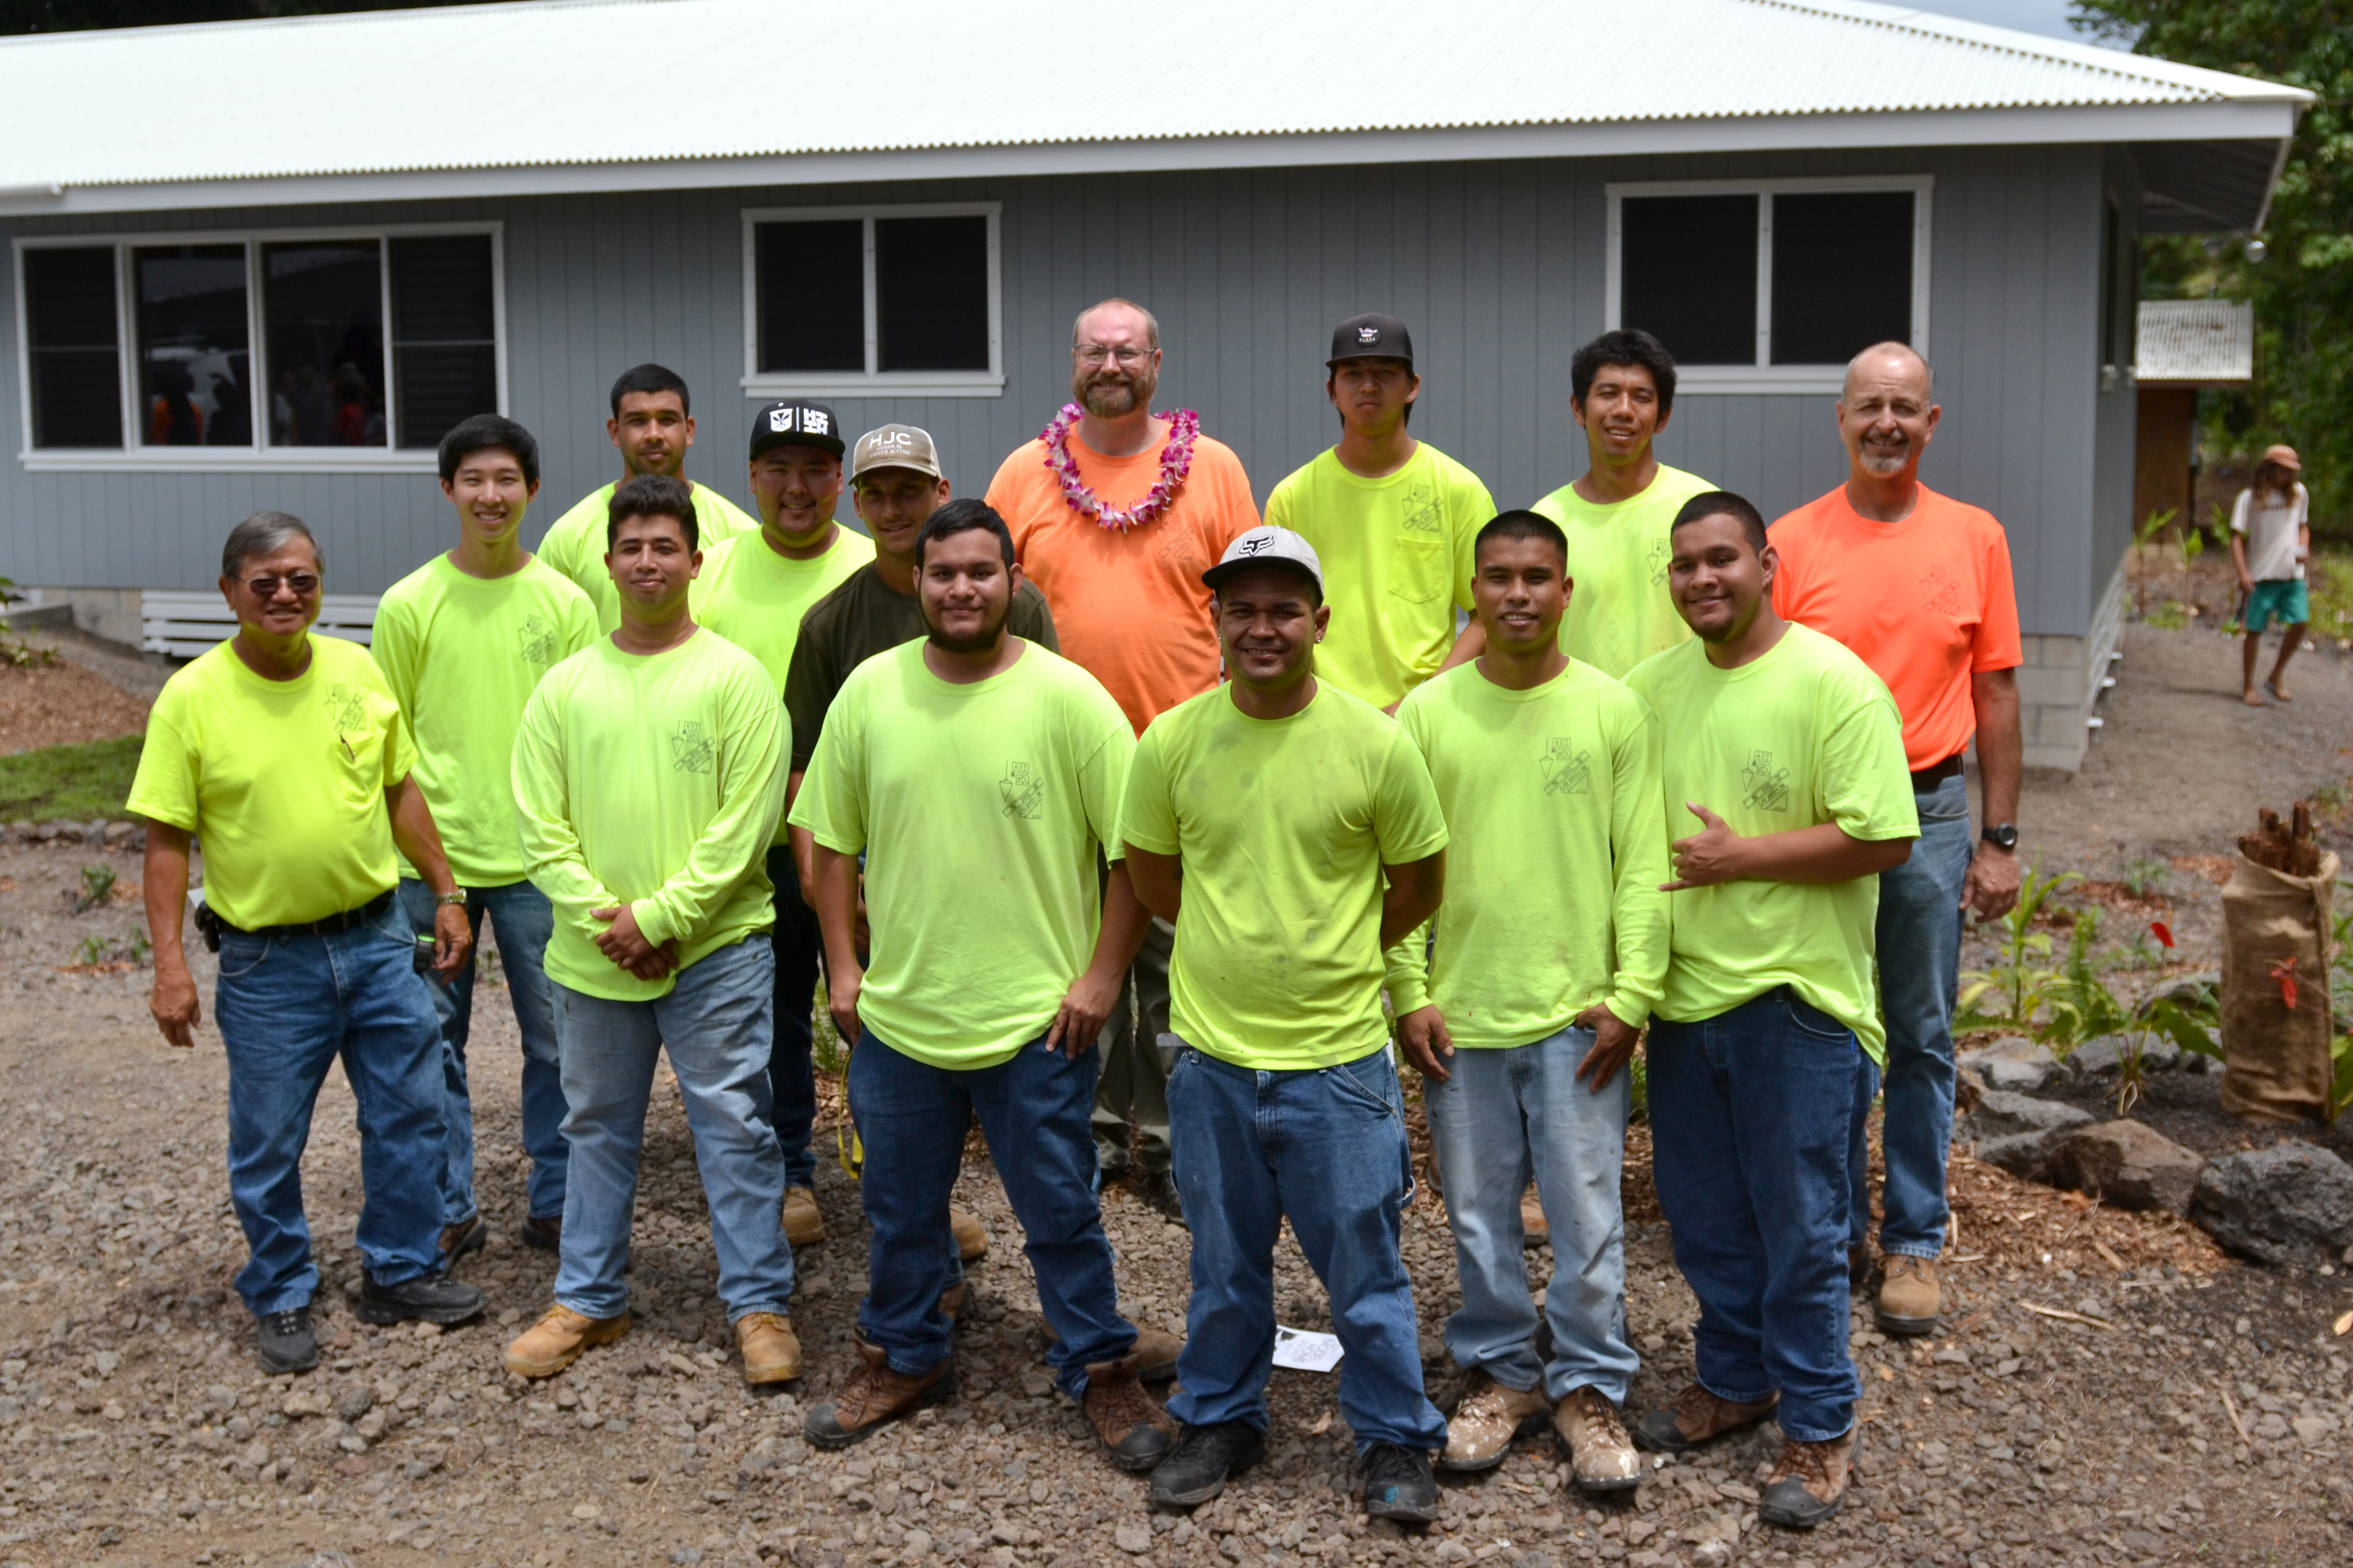 Group photo of carpentry students outside house they built